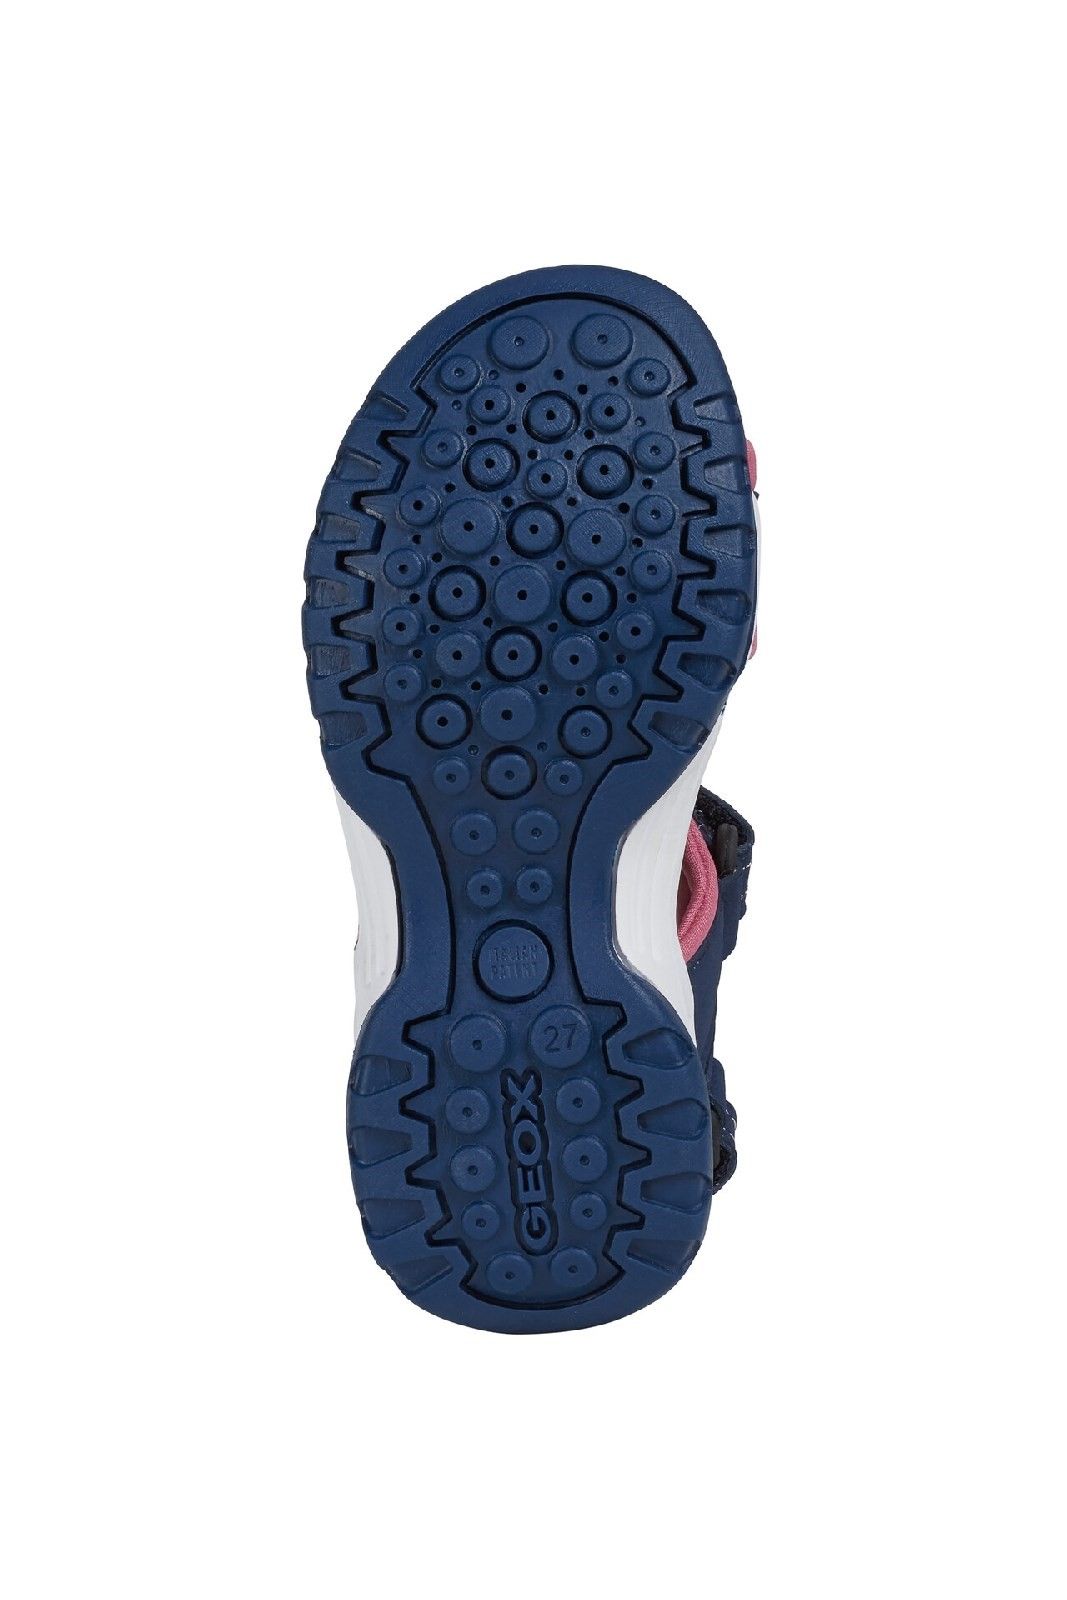 GEOX ensures the correct development and wellbeing for young feet during every phase of growth. These shoes are perfect for everyday wear: strong, comfortable and stylish. The breathable and waterproof membrane keeps feet dry and comfortable.Exclusive Patent. 
Perforated footbed. 
Lightweight Outsole.